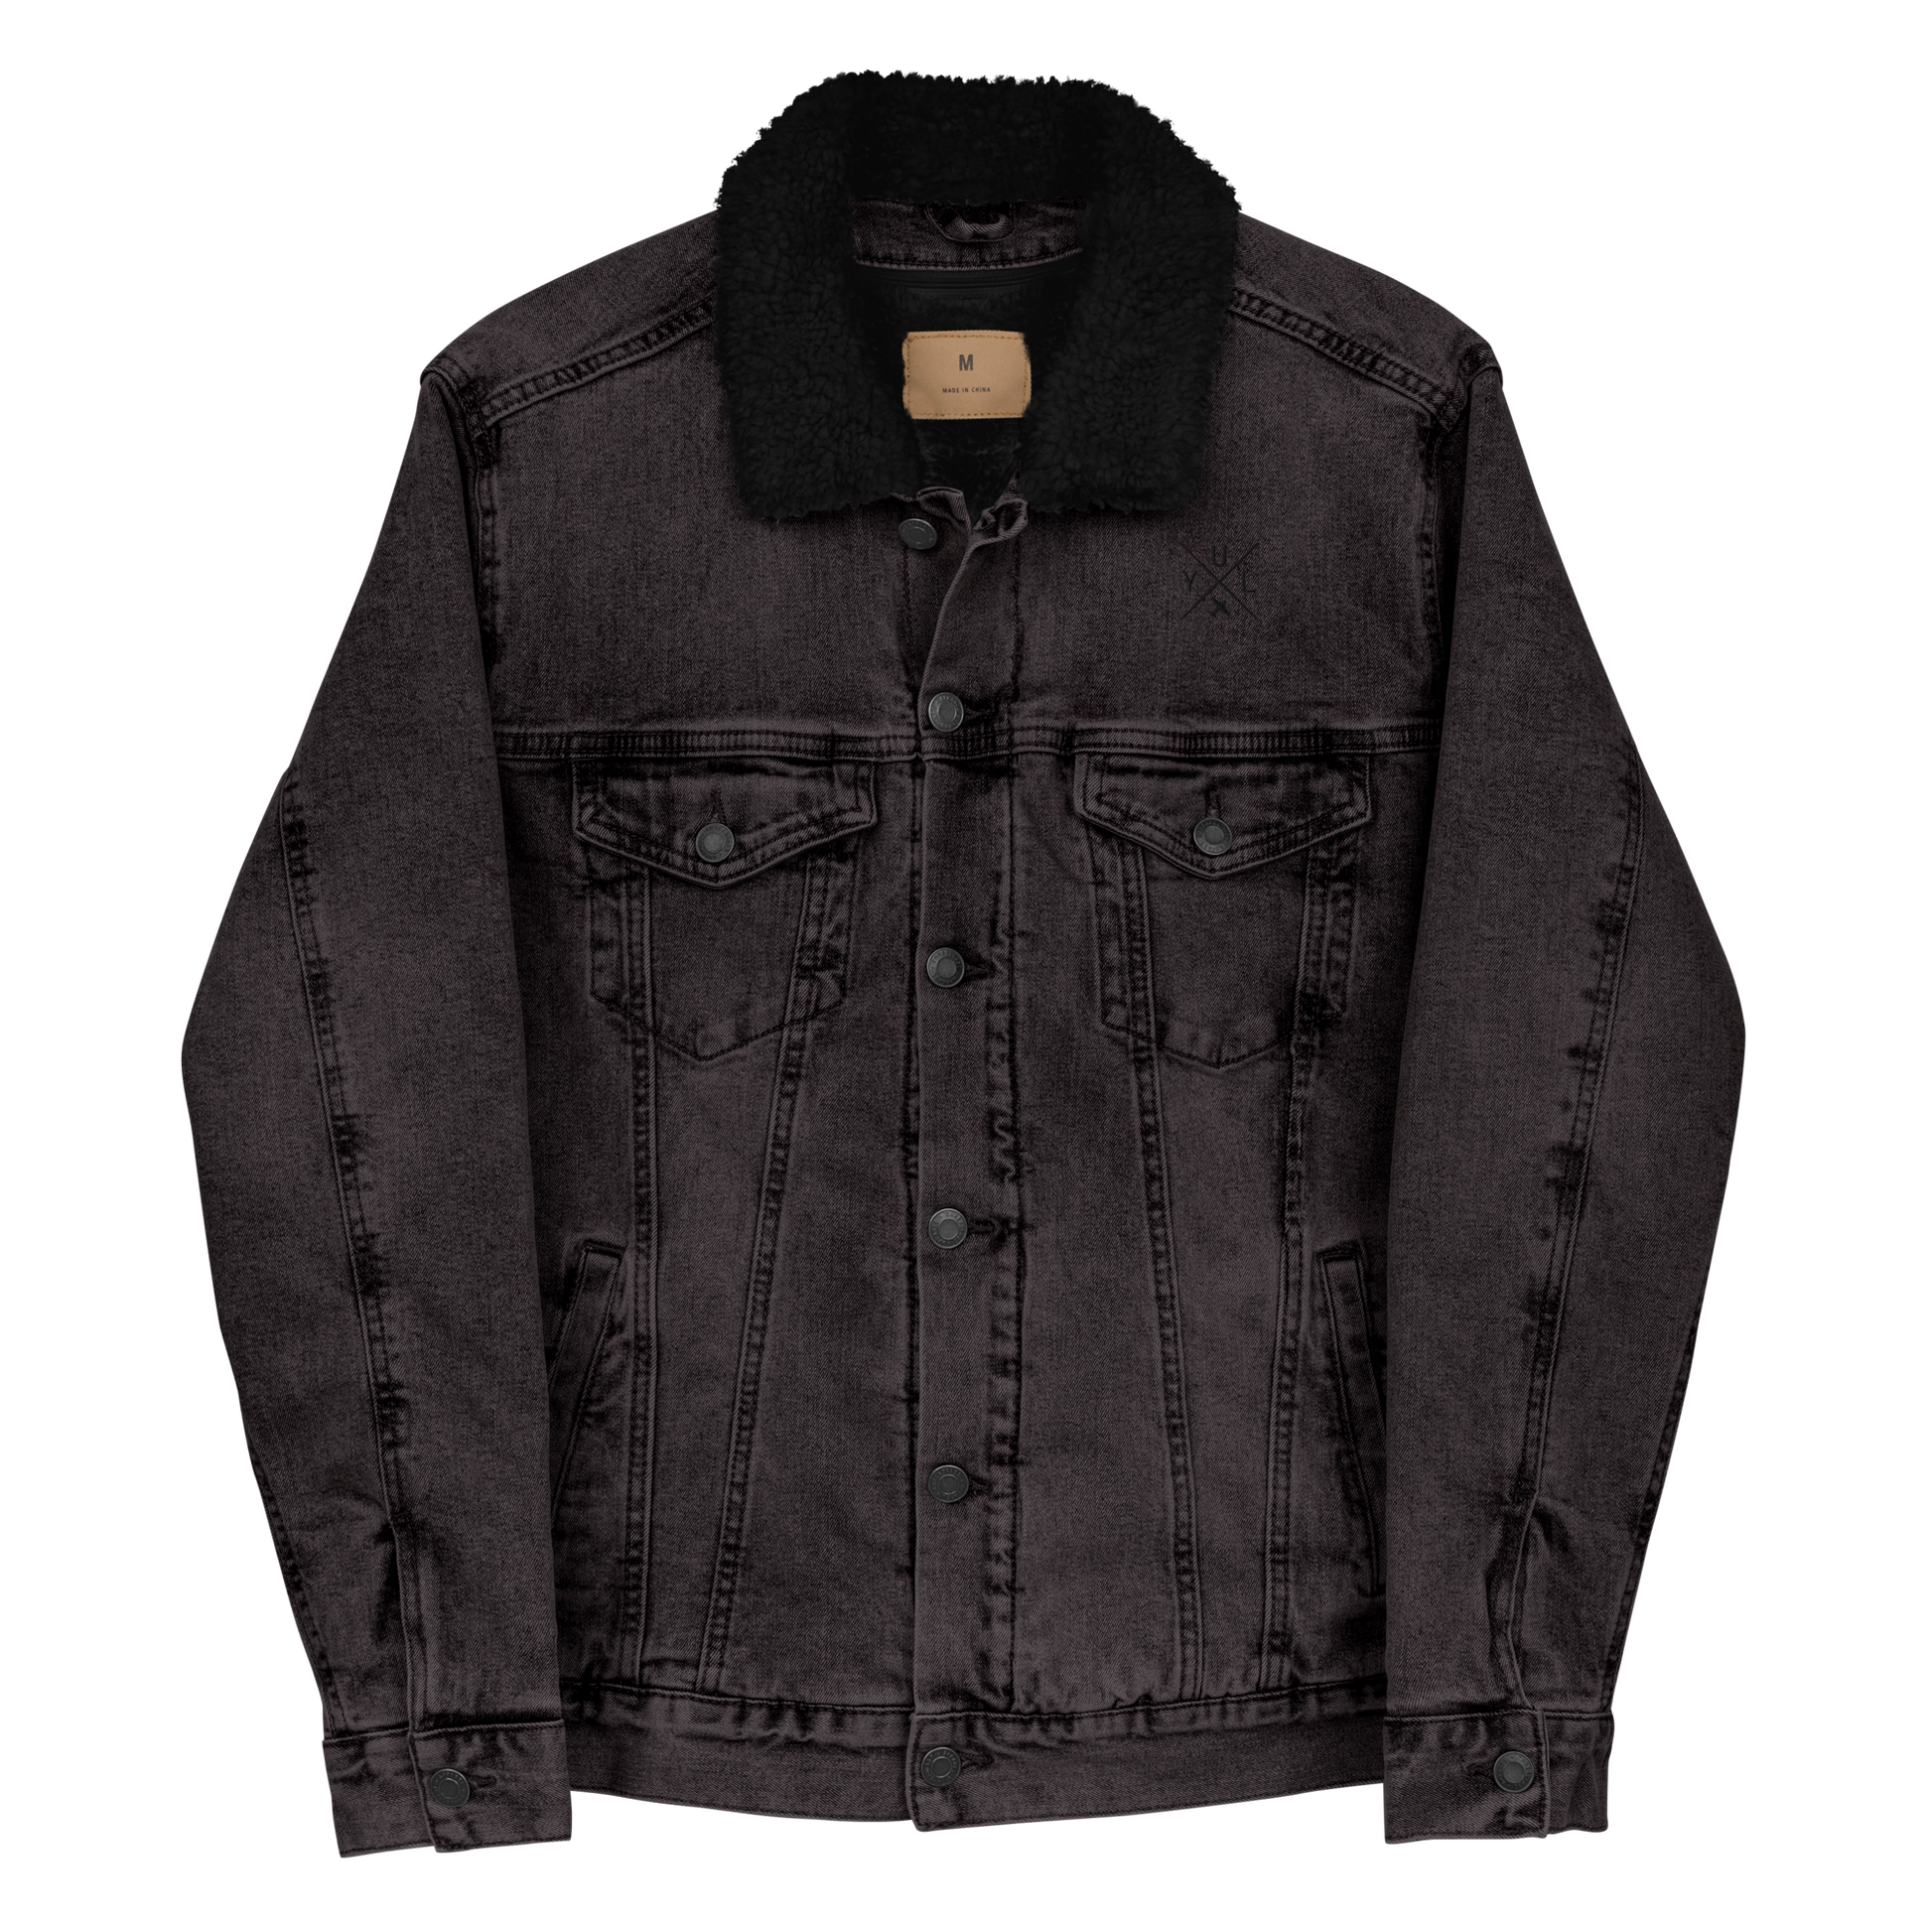 YHM Designs - YUL Montreal Denim Sherpa Jacket - Crossed-X Design with Airport Code and Vintage Propliner - Black & White Embroidery - Image 06